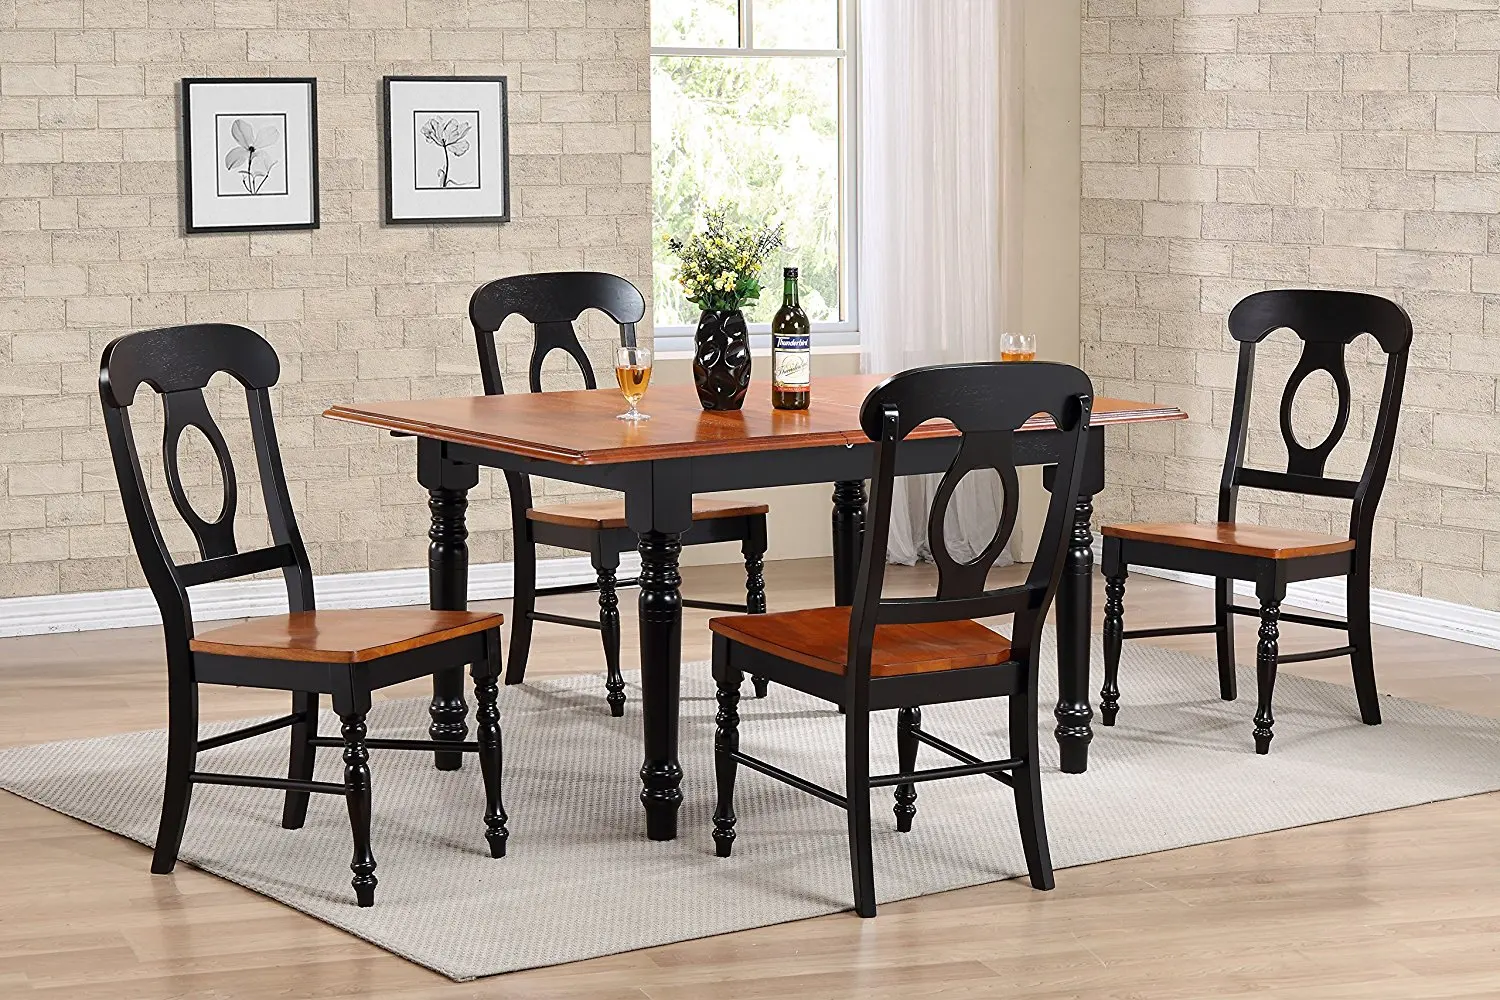 Cheap Butterfly Leaf Dining Table Sets, find Butterfly Leaf Dining